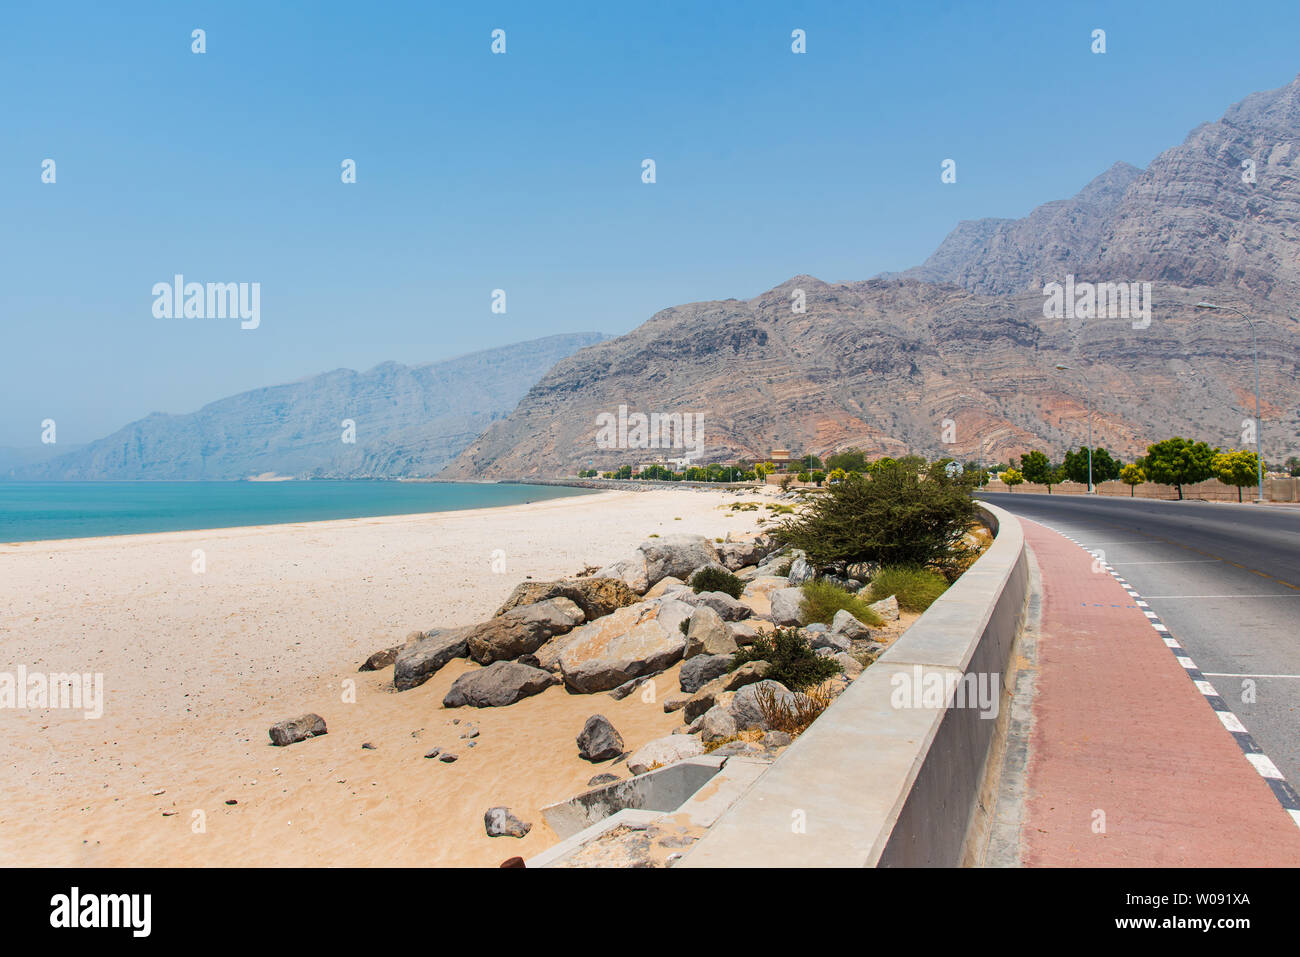 Scenic coastal road in Musandam Governorate of Oman surrounded by sandstones Stock Photo